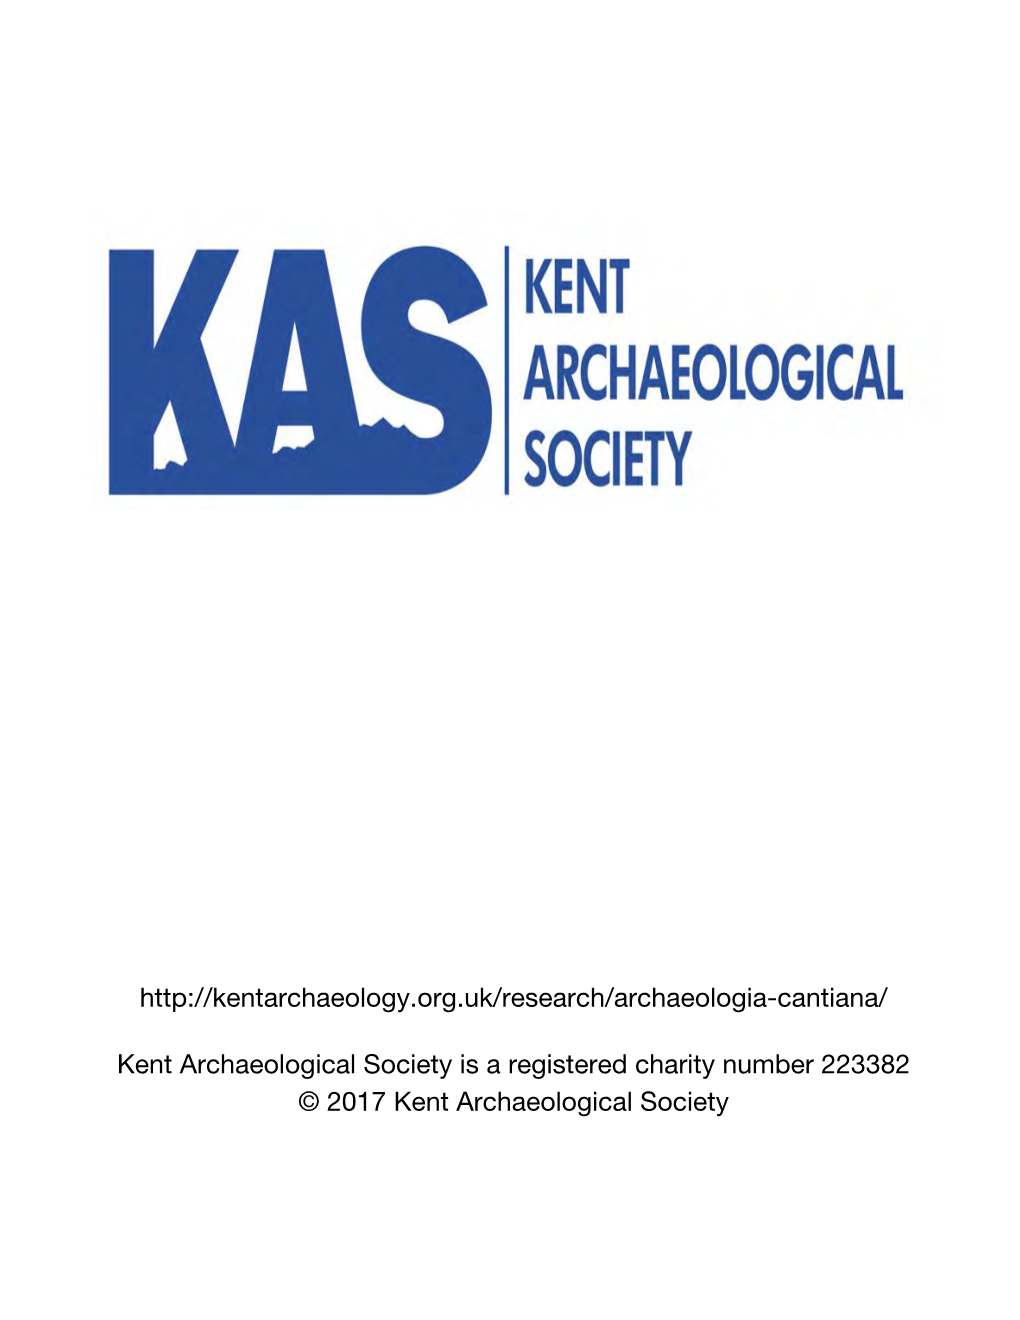 Kent Archaeological Society Is a Registered Charity Number 223382